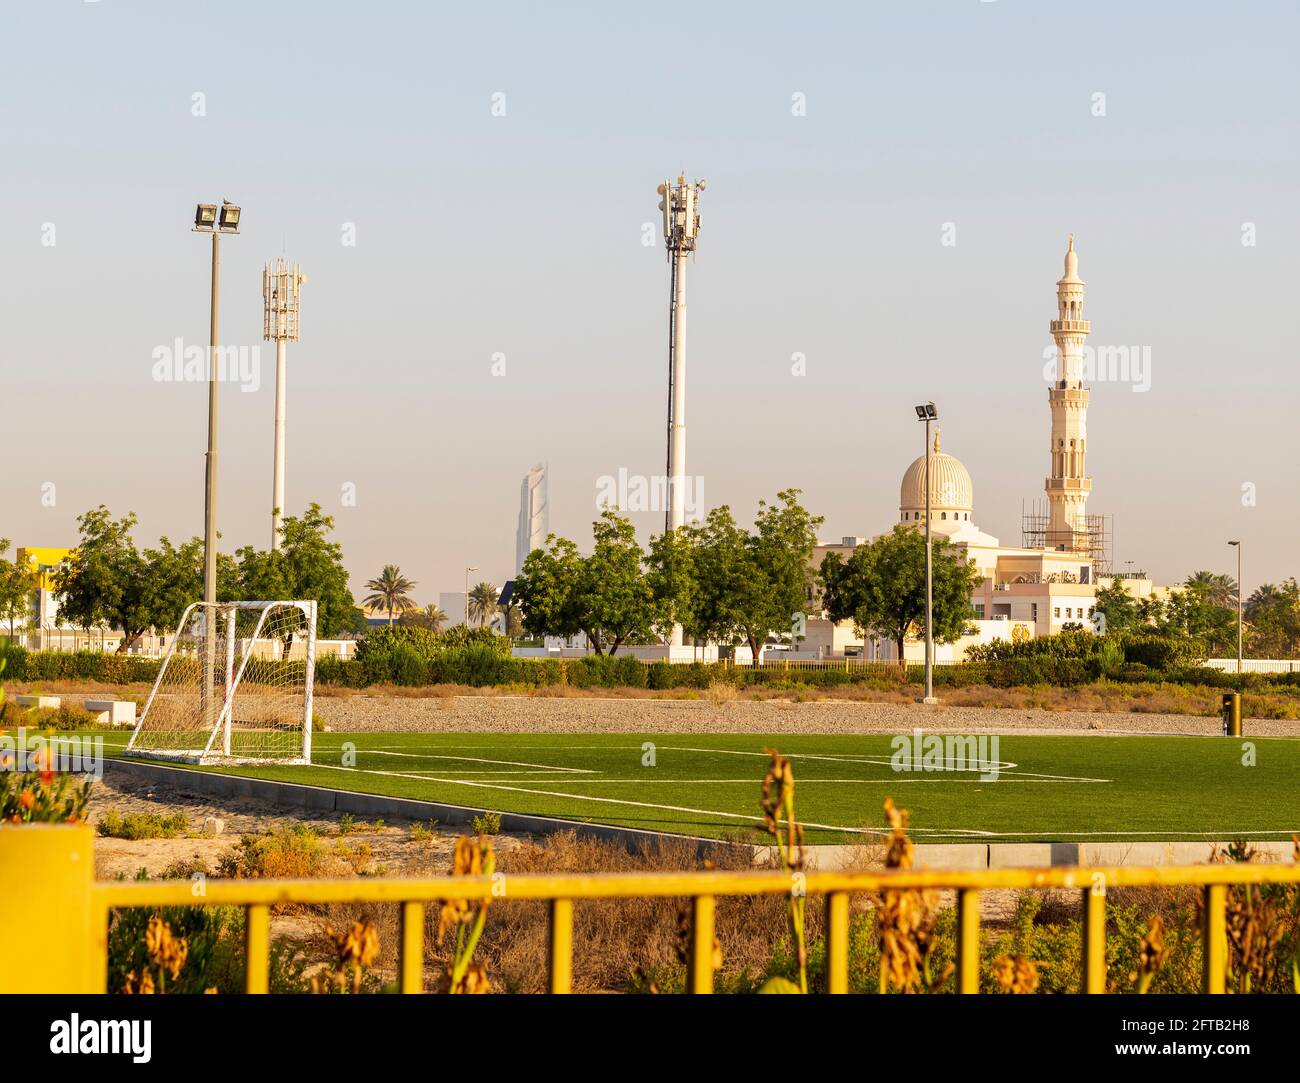 Dubai, UAE - 05.21.2021 - Football pitch in Nad Al Hamar park, early in the morning. Stock Photo